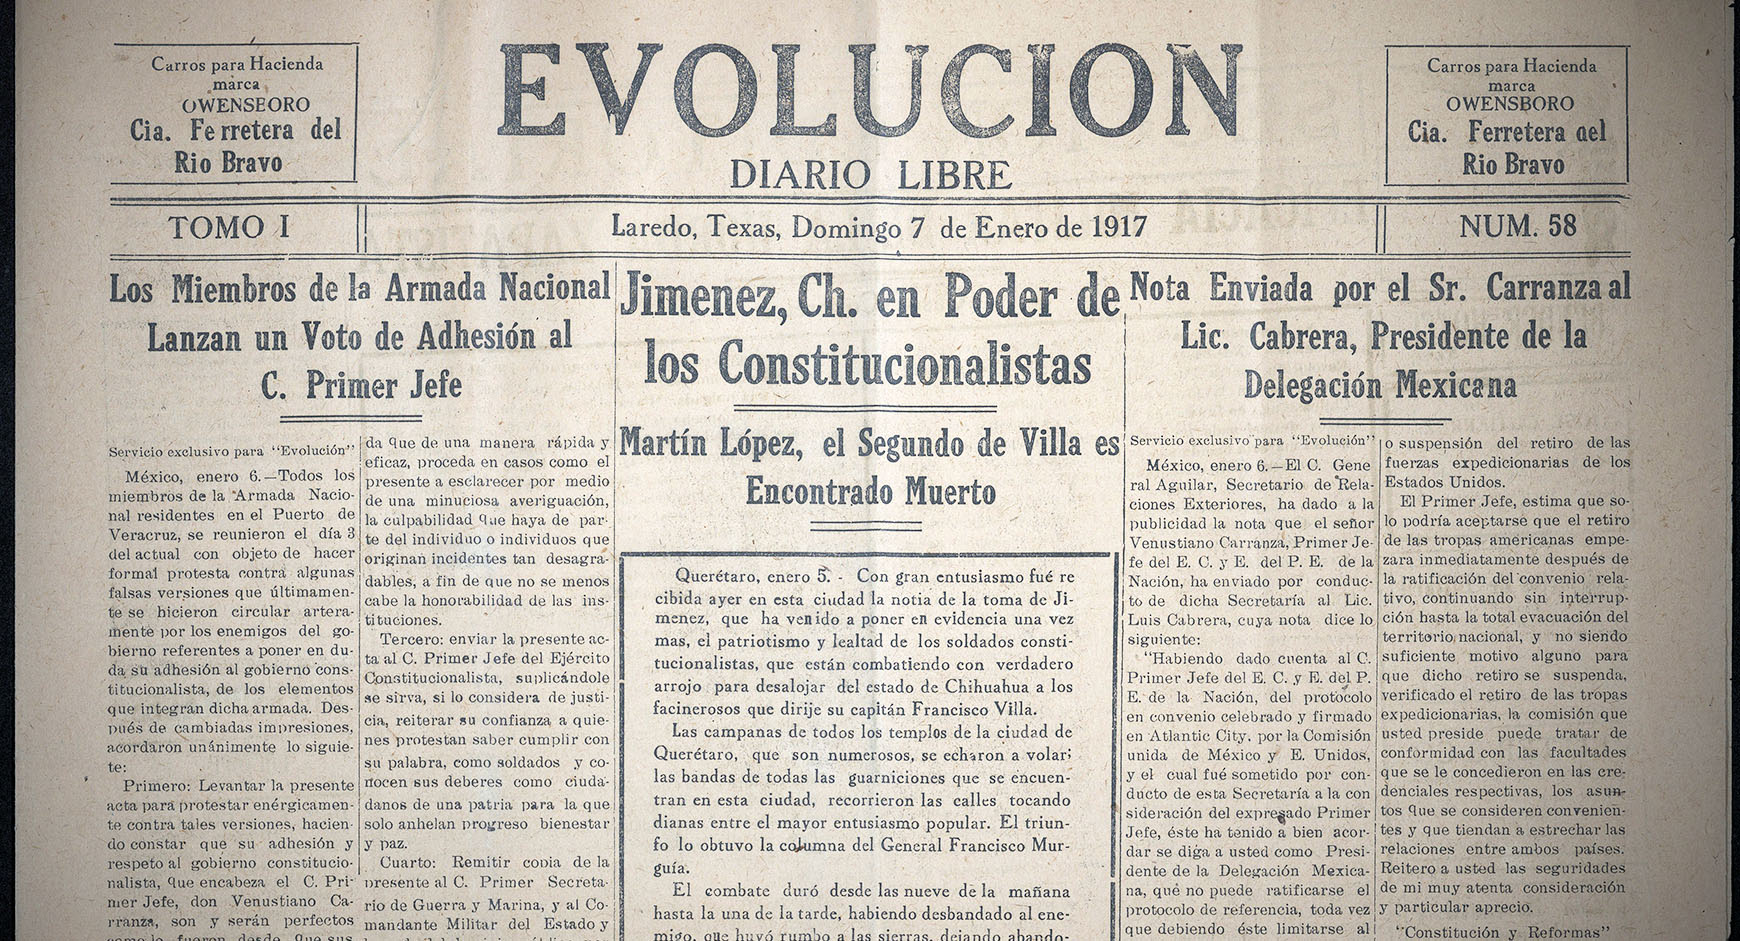 Detail of Newspaper Evolución, Tomo I, Número 58, 1917 Enero 7 Description: Newspaper includes updates related to the Mexican Revolution: for example, Martín López, Francisco (Pancho) Villa’s second, was found dead in Chihuahua. 